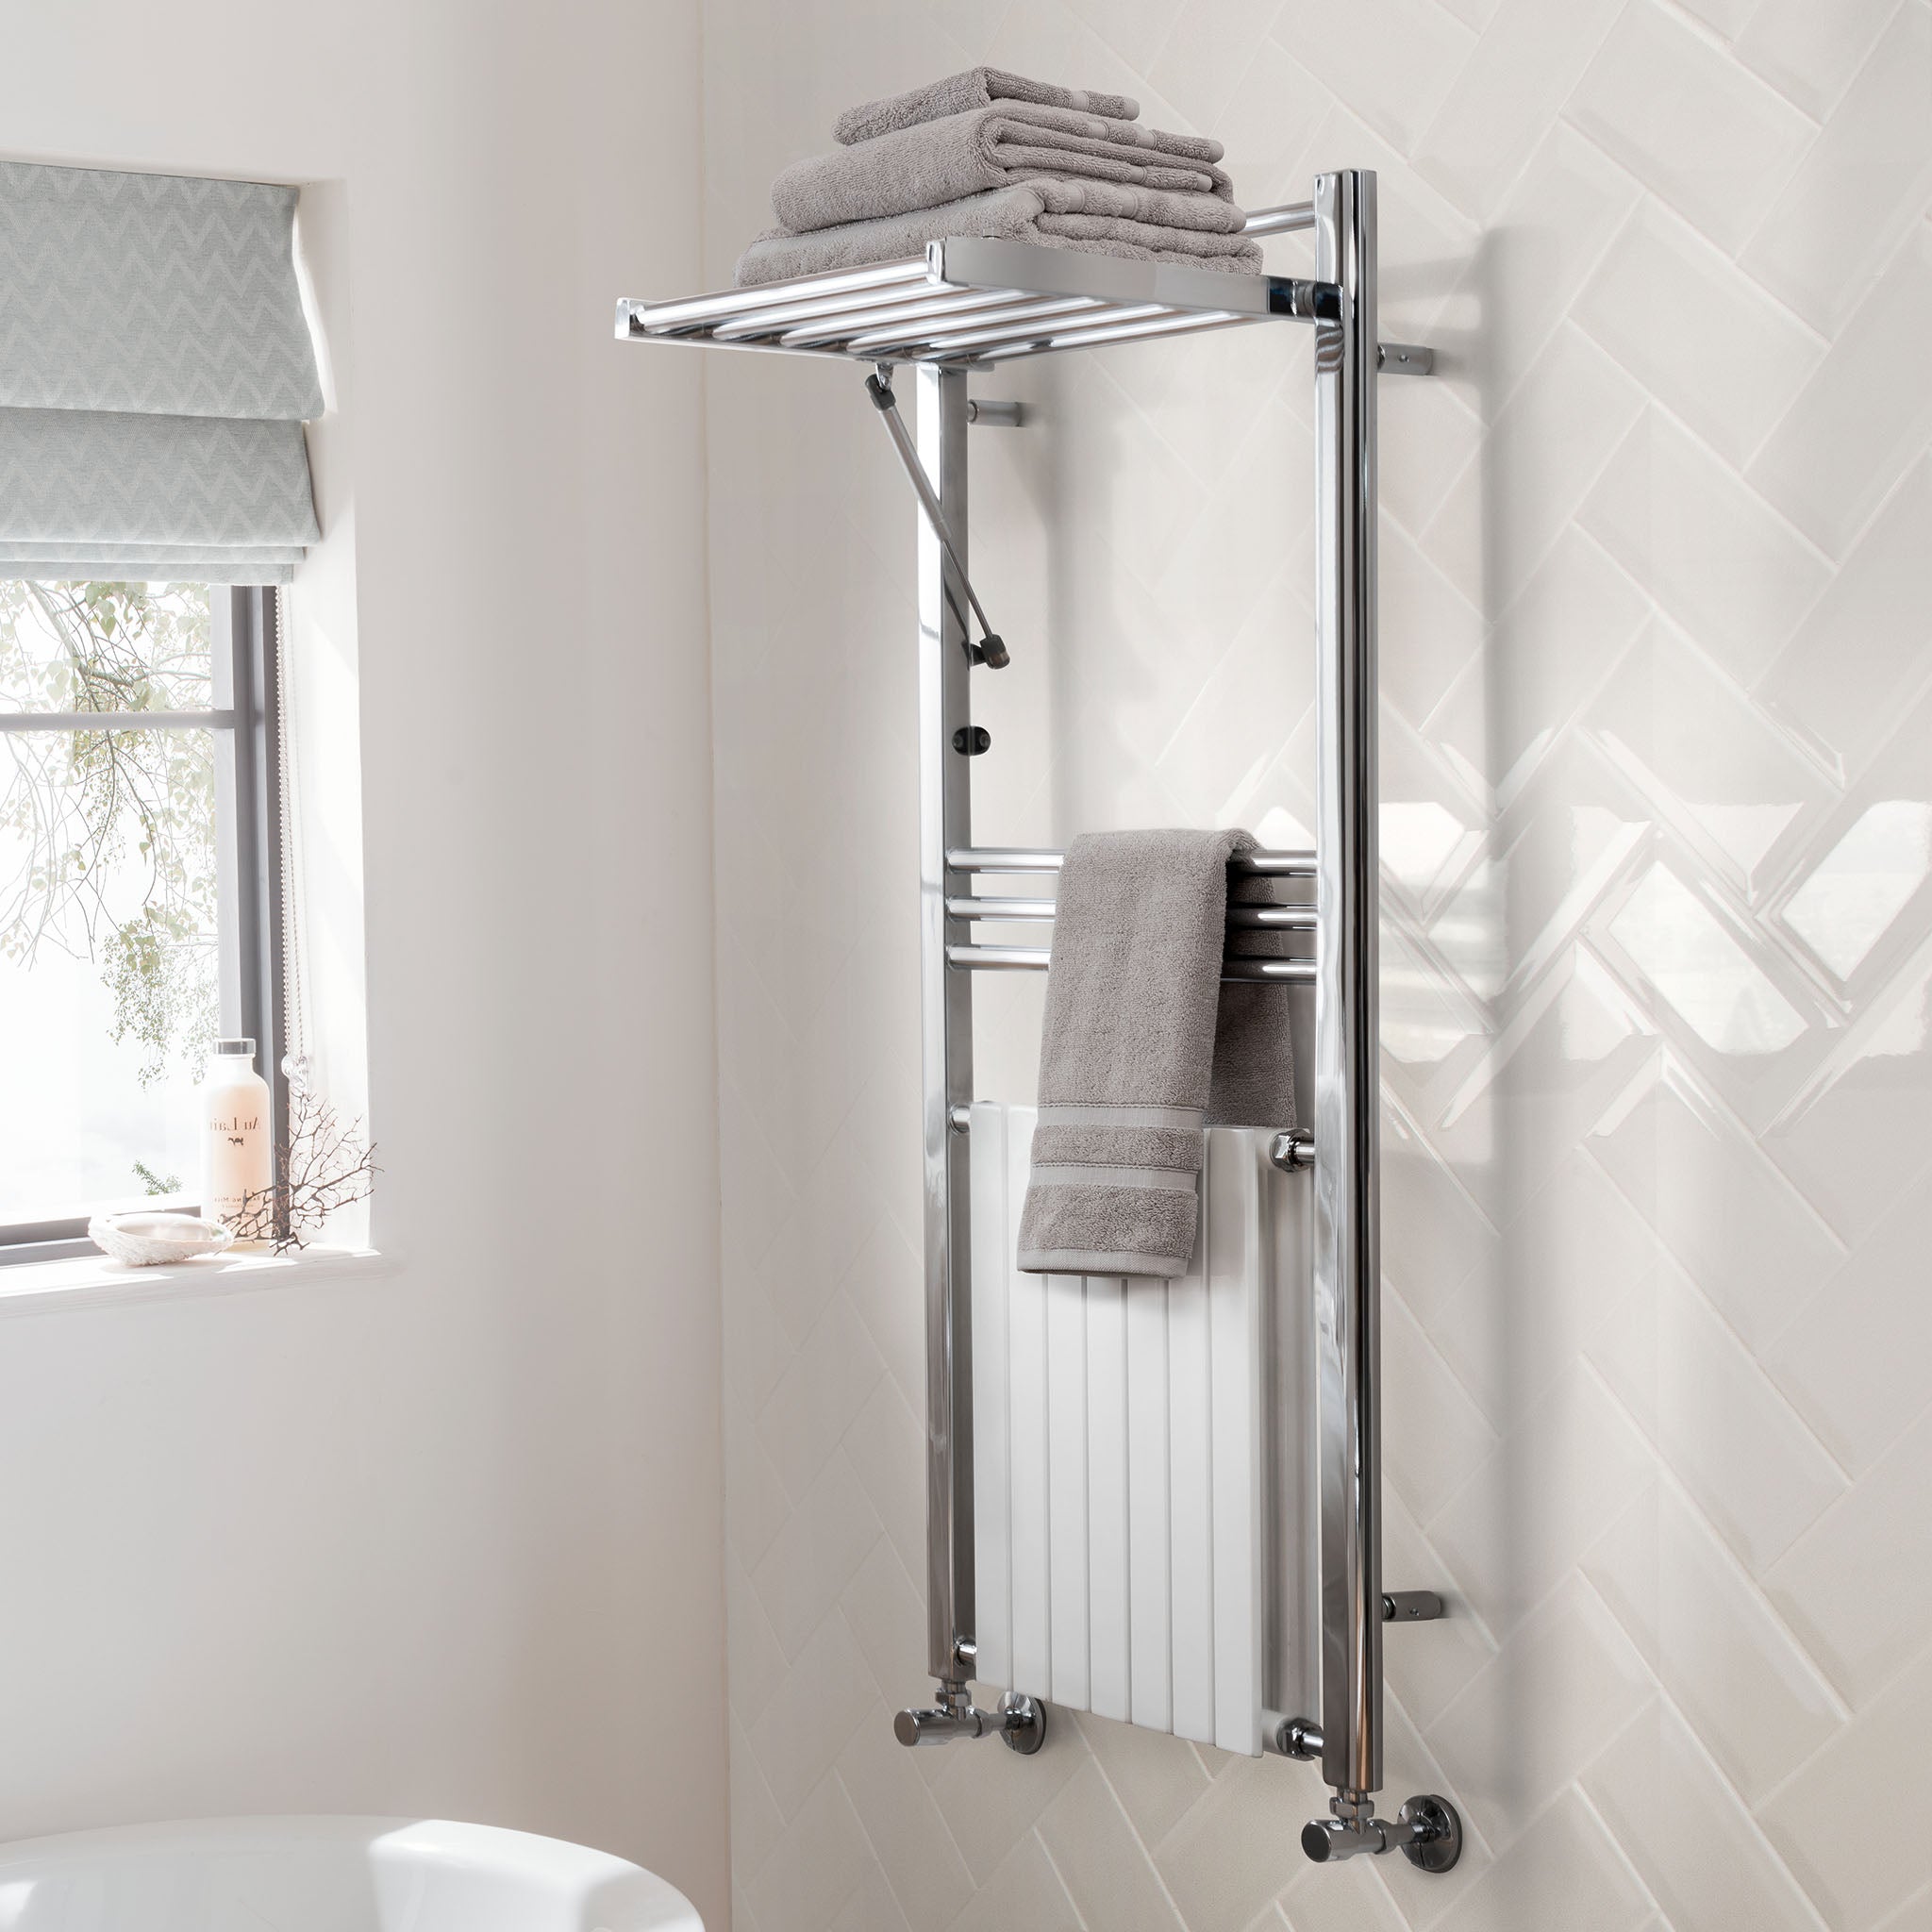 Vogue Harmonique Duo Wall Mounted Heated Towel Rail